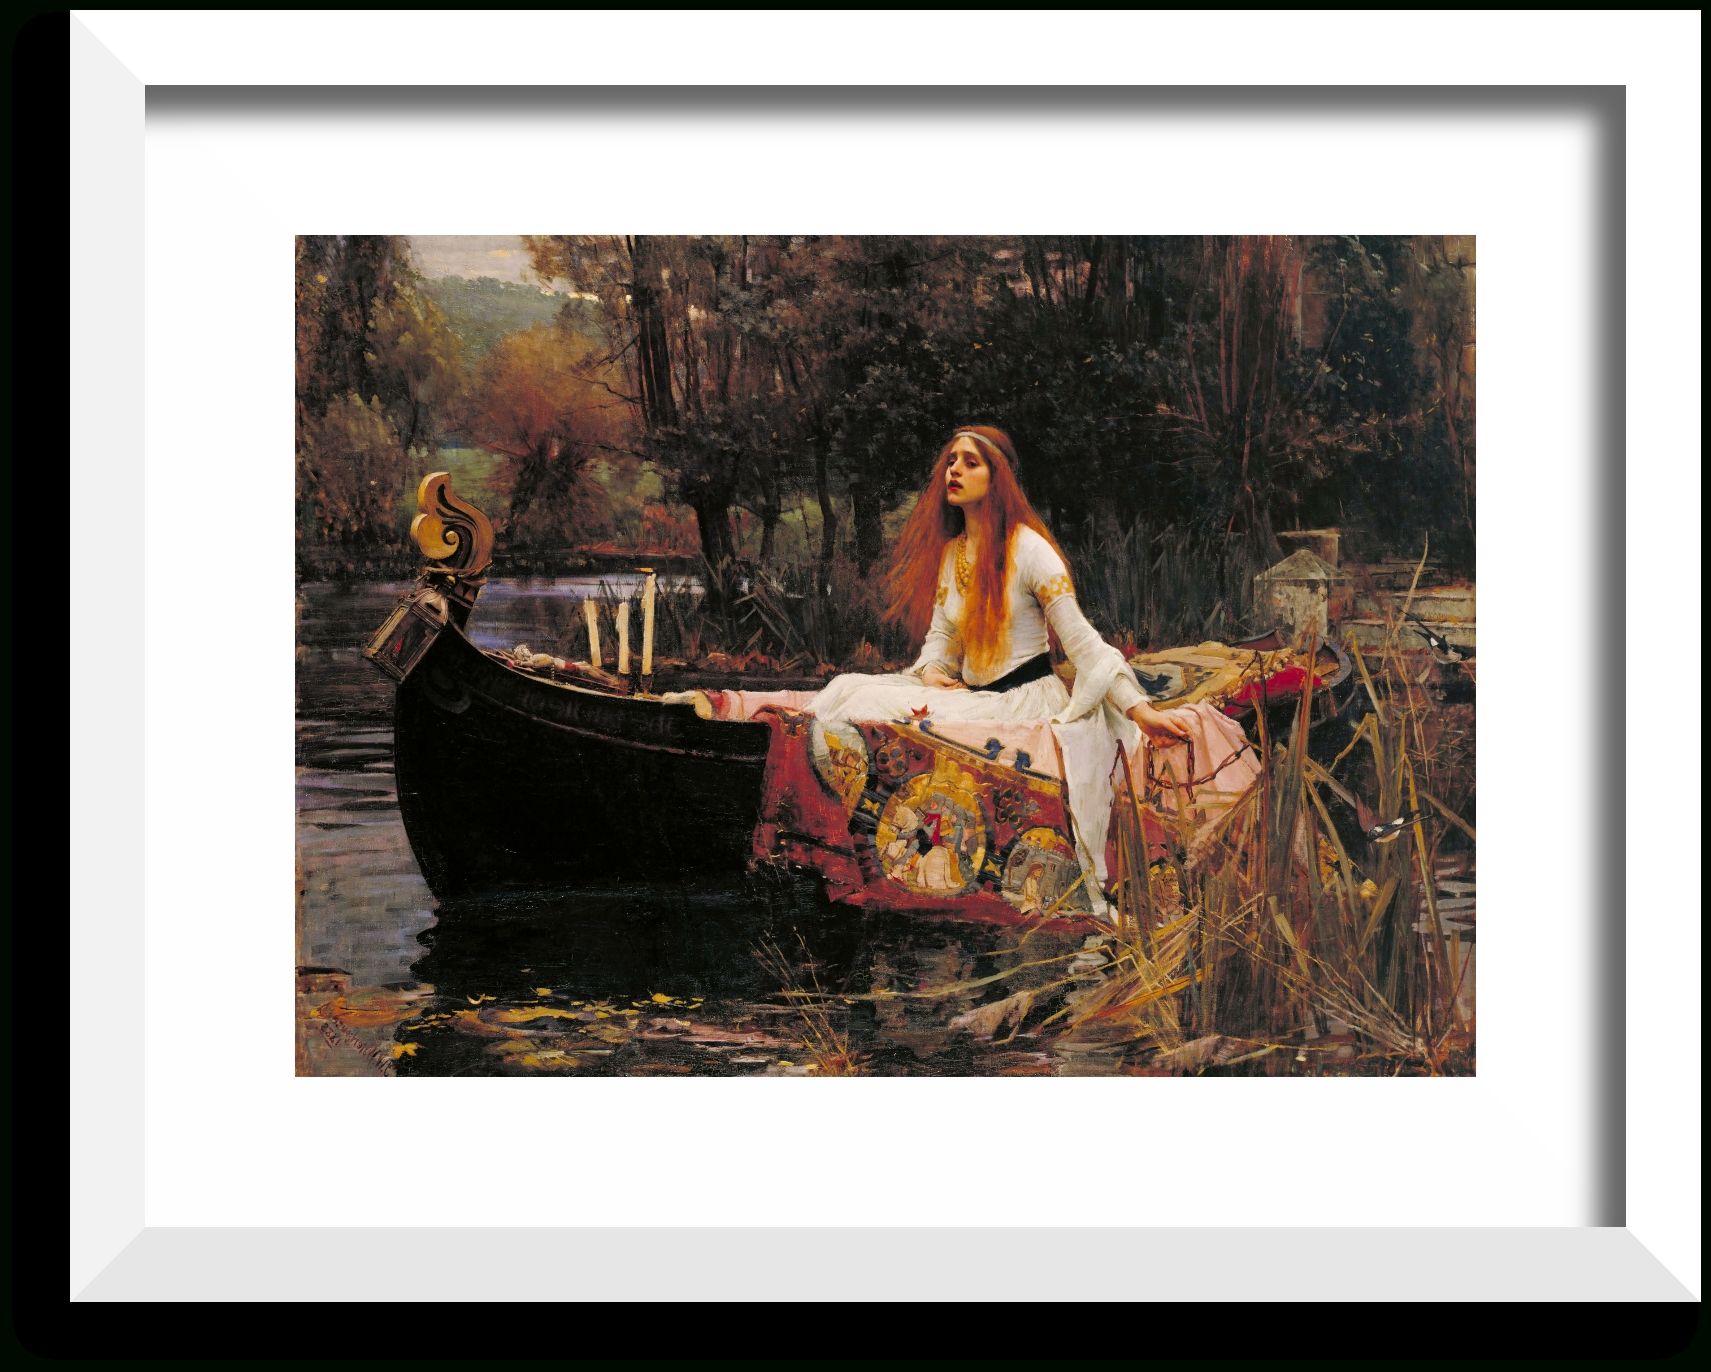 Most Up To Date Felician Rops Framed Canvas Giclee Prints With Archival Inks Uk Within Famous Art Framed Prints (View 9 of 15)